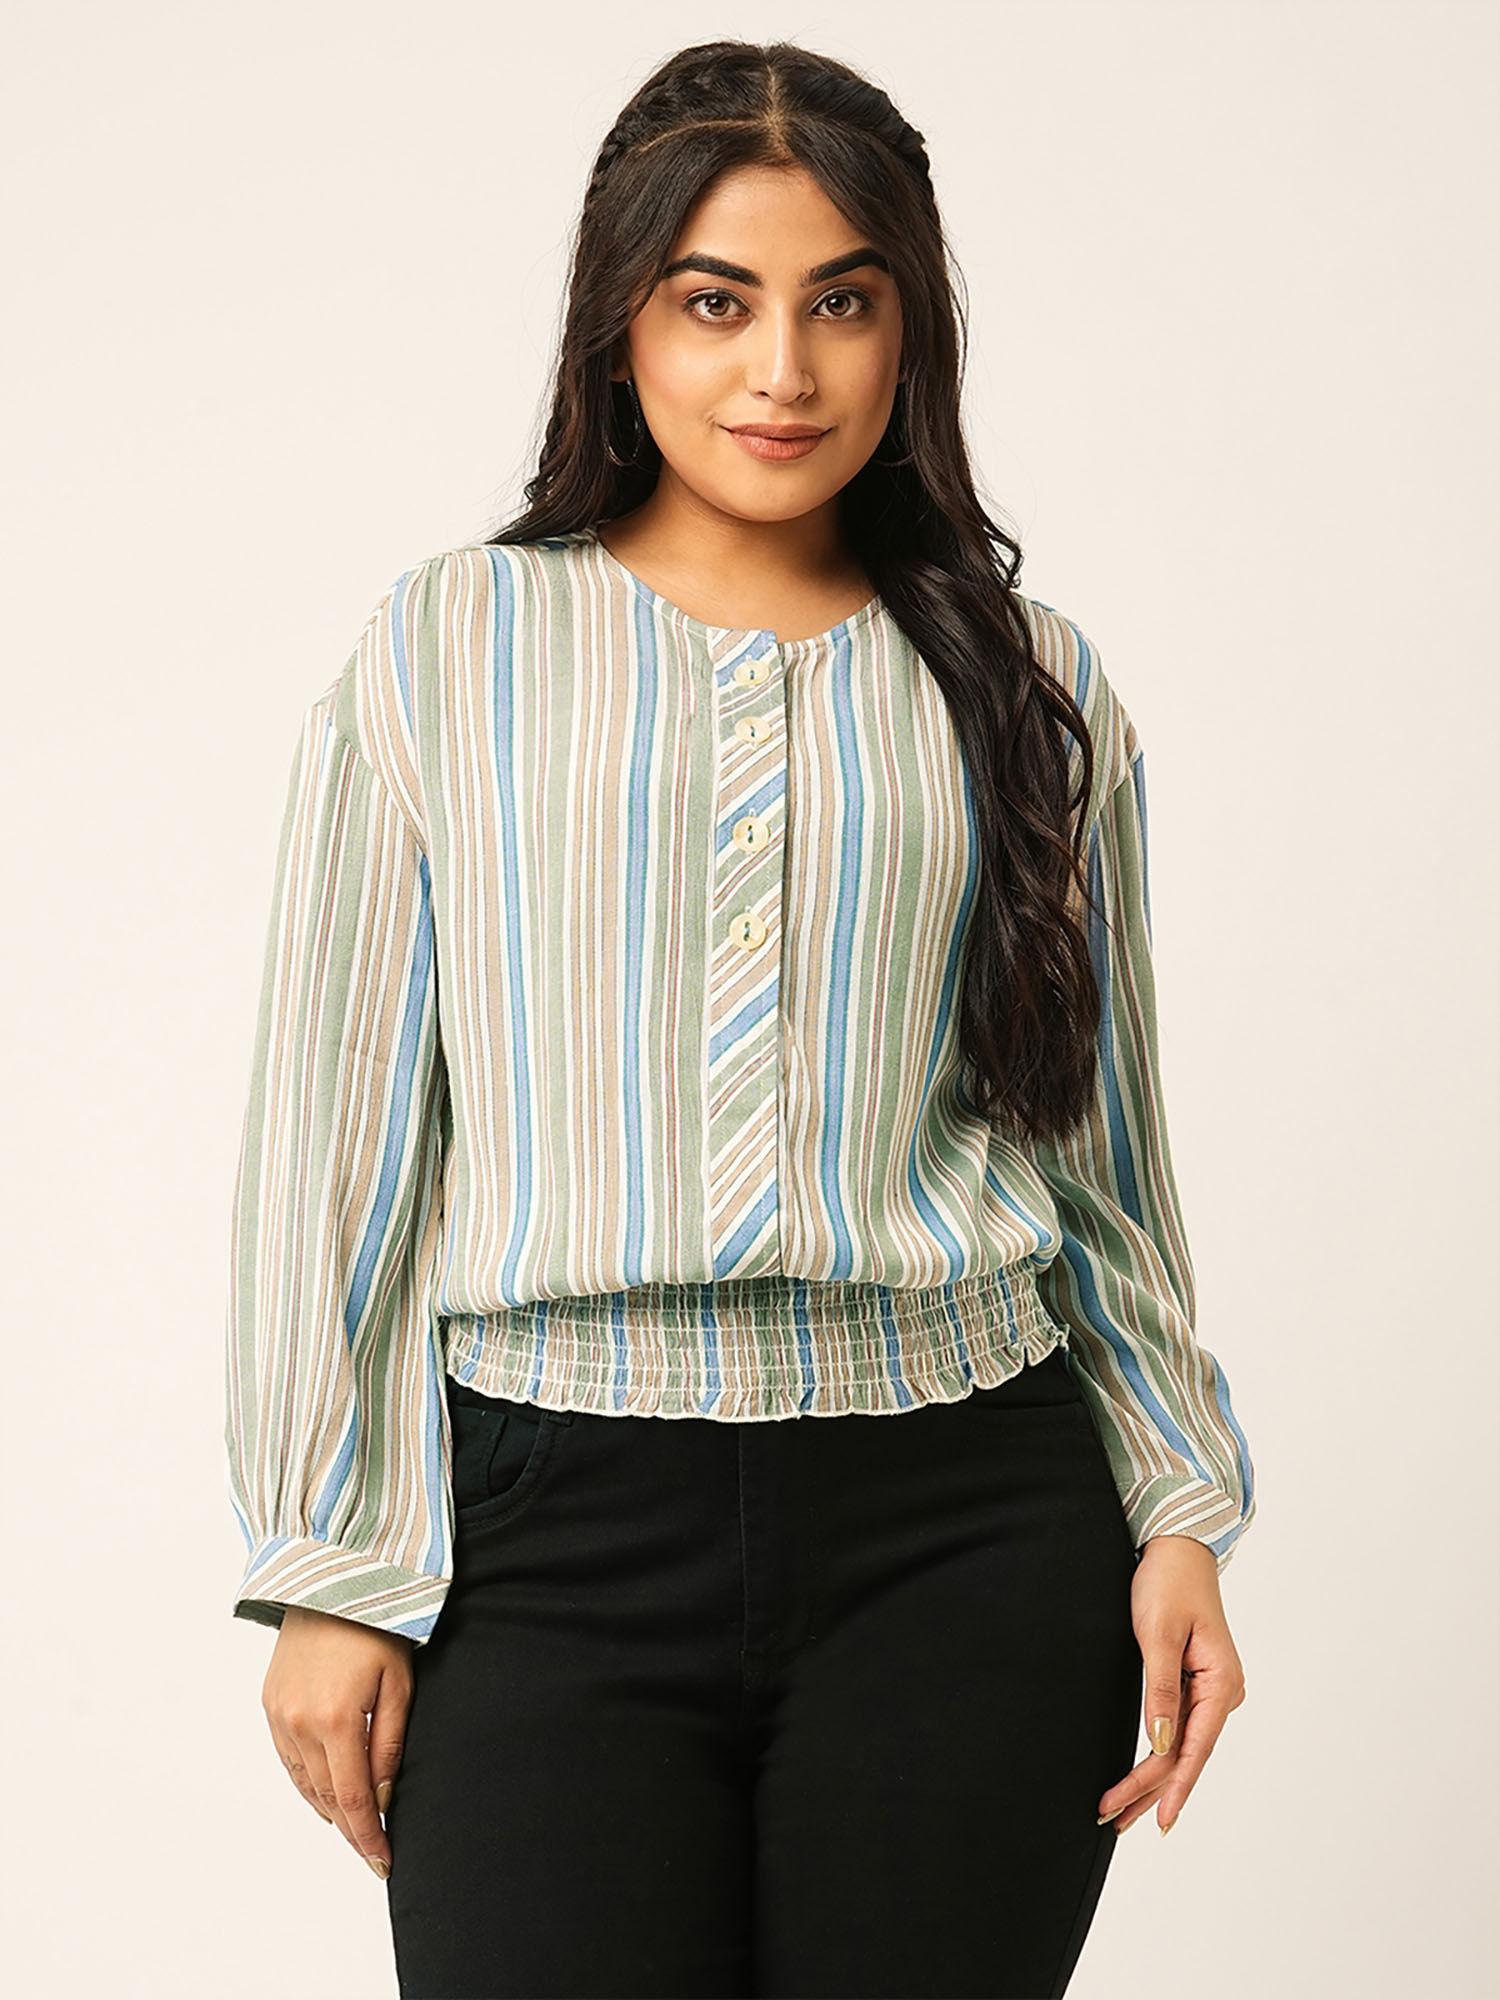 olive cotton striped top for women